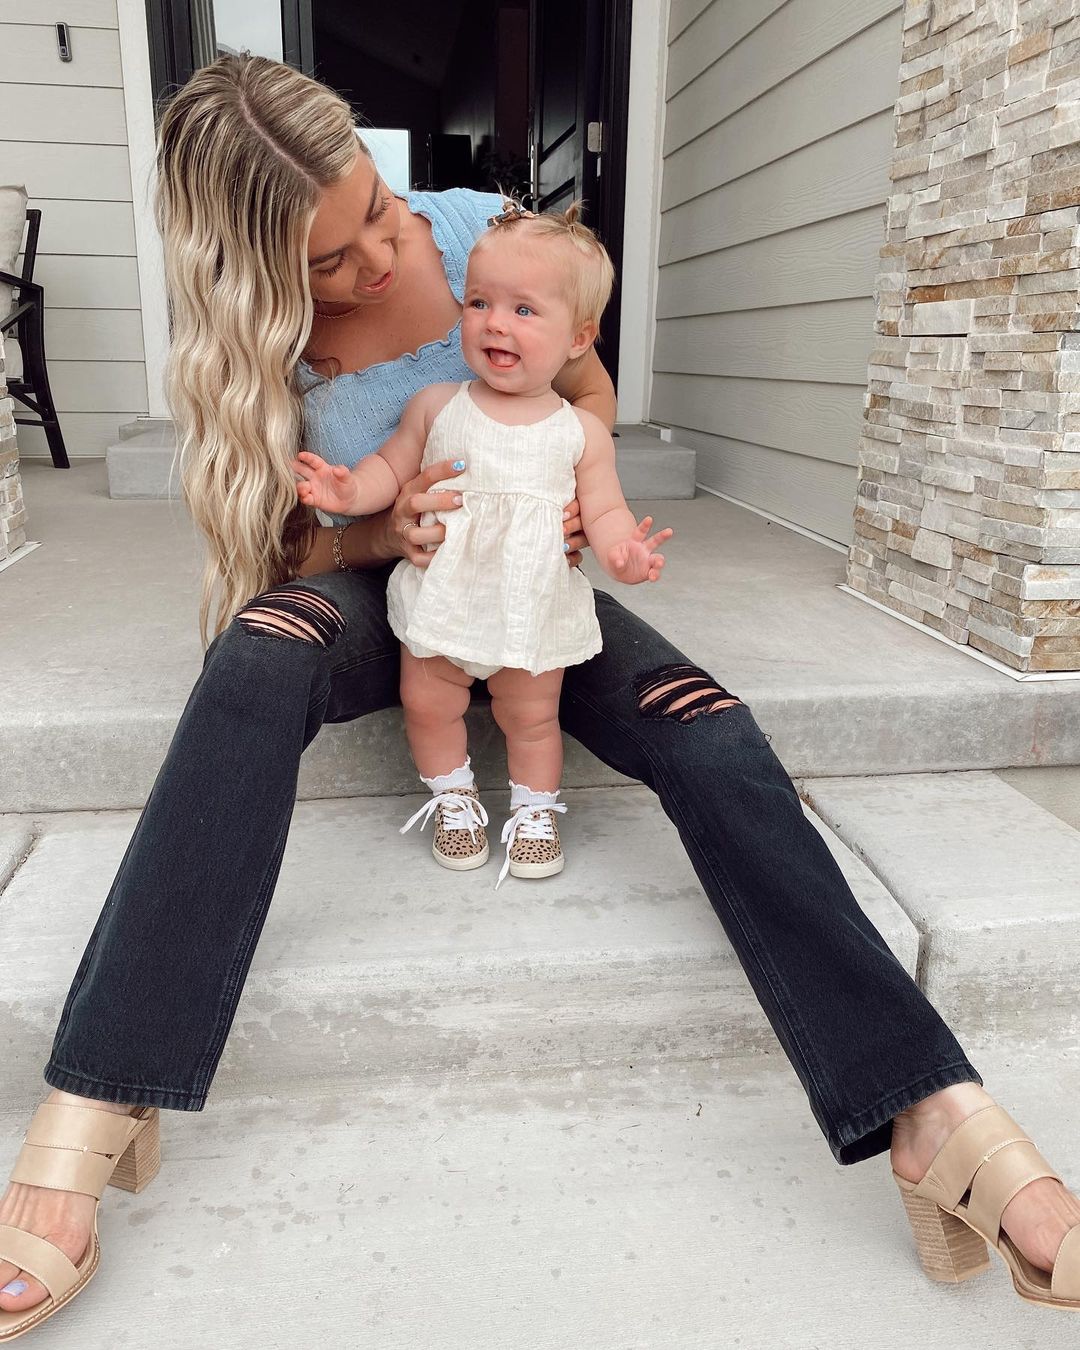 DWTS’ Lindsay Arnold Says 8-Month-Old Daughter Sage Is ‘a Crawling Maniac'